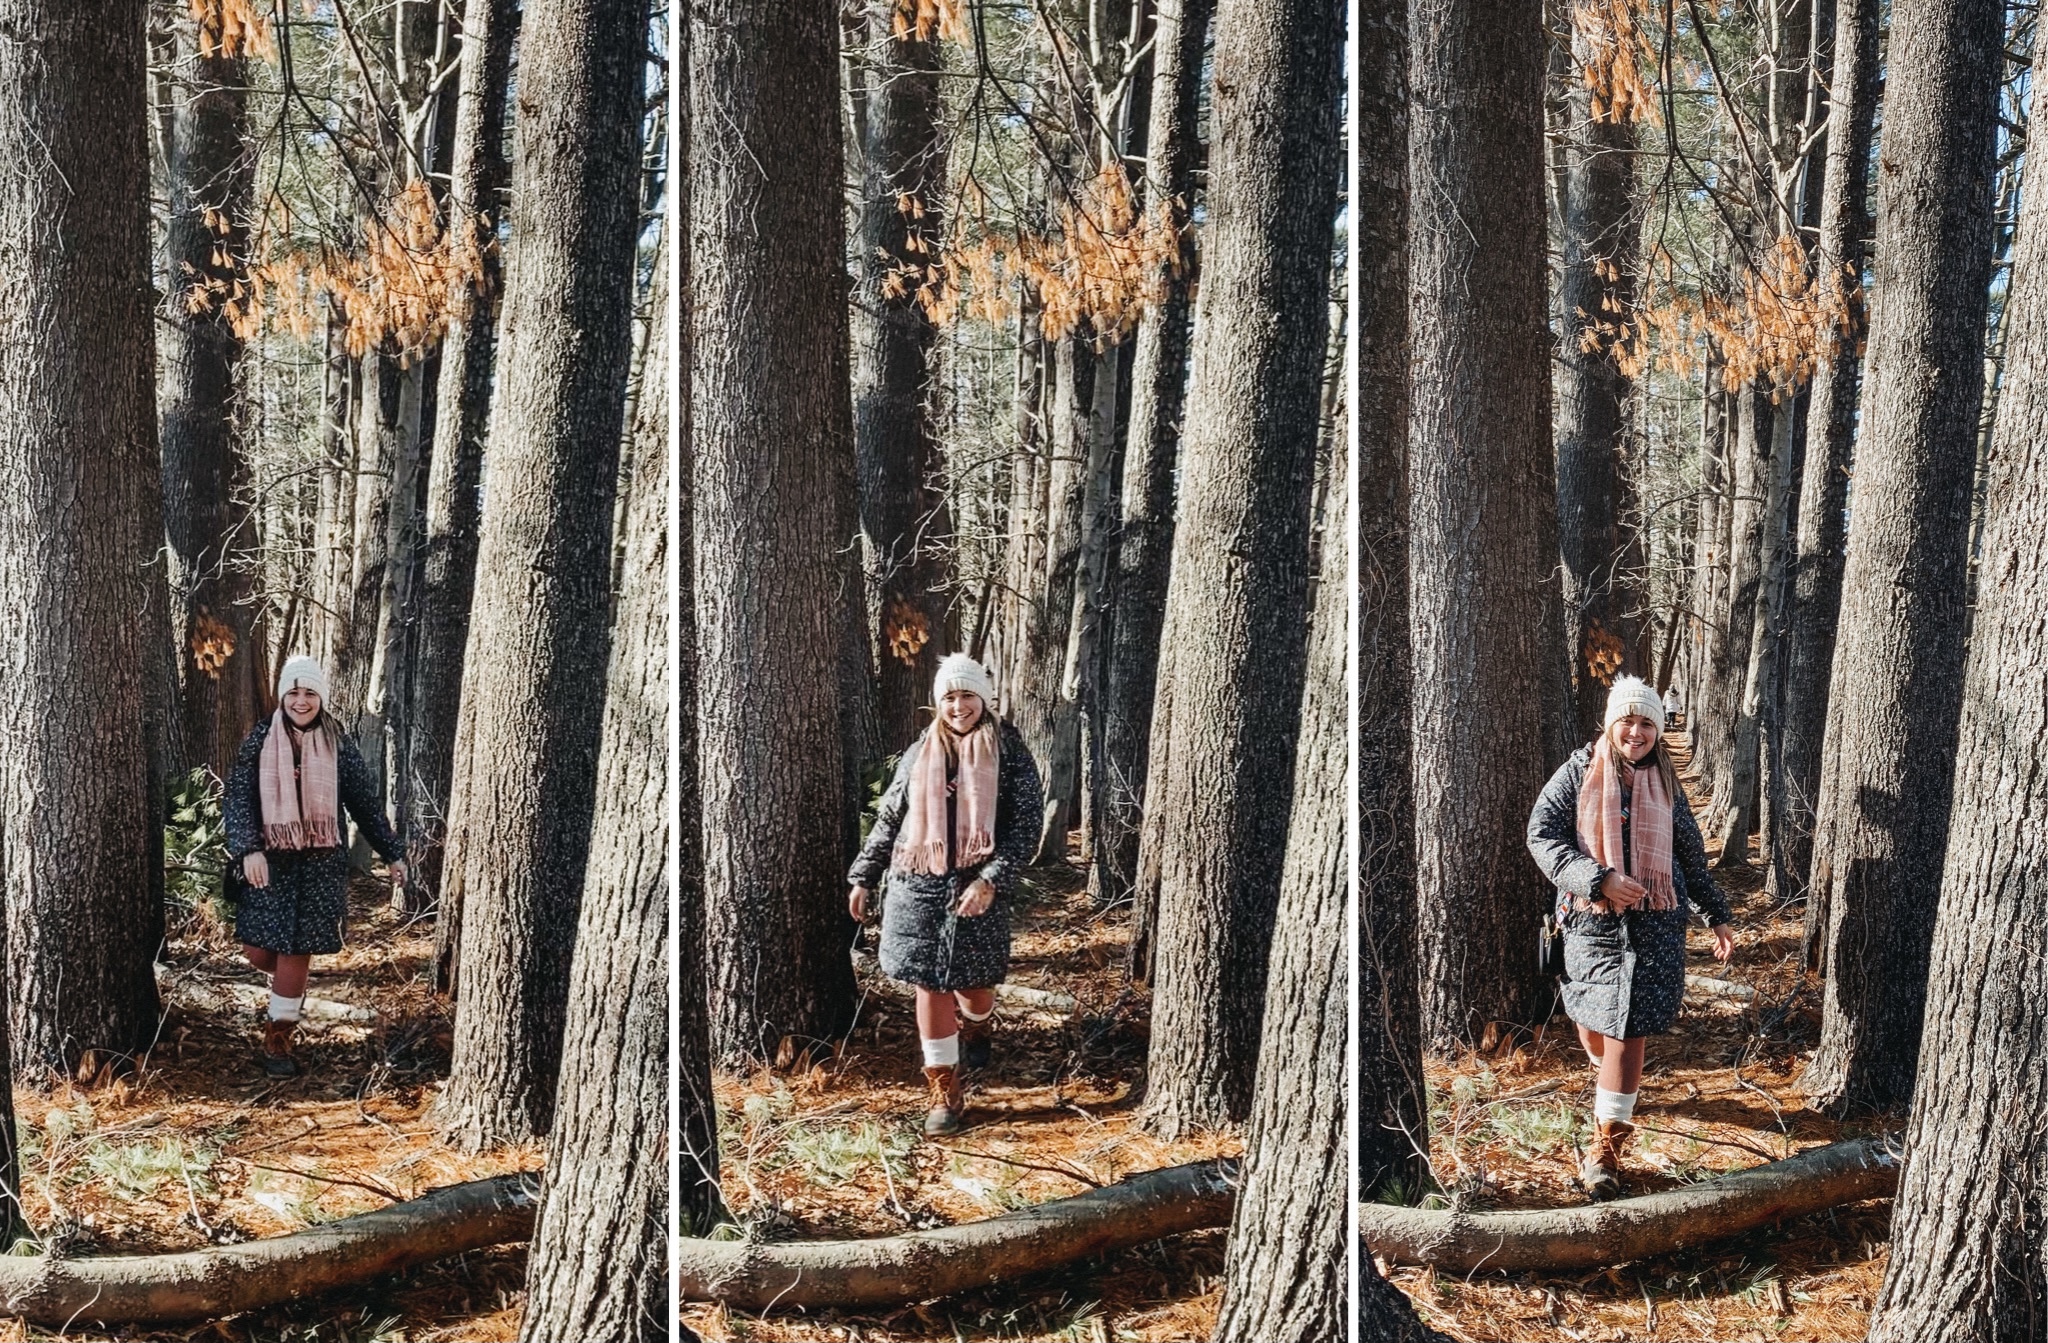 Three pictures are side by side. Each shows Alexandra is walking down a tree lined path. In each photo she gets closer to the camera. These photos represent her motivation to keep moving forward.